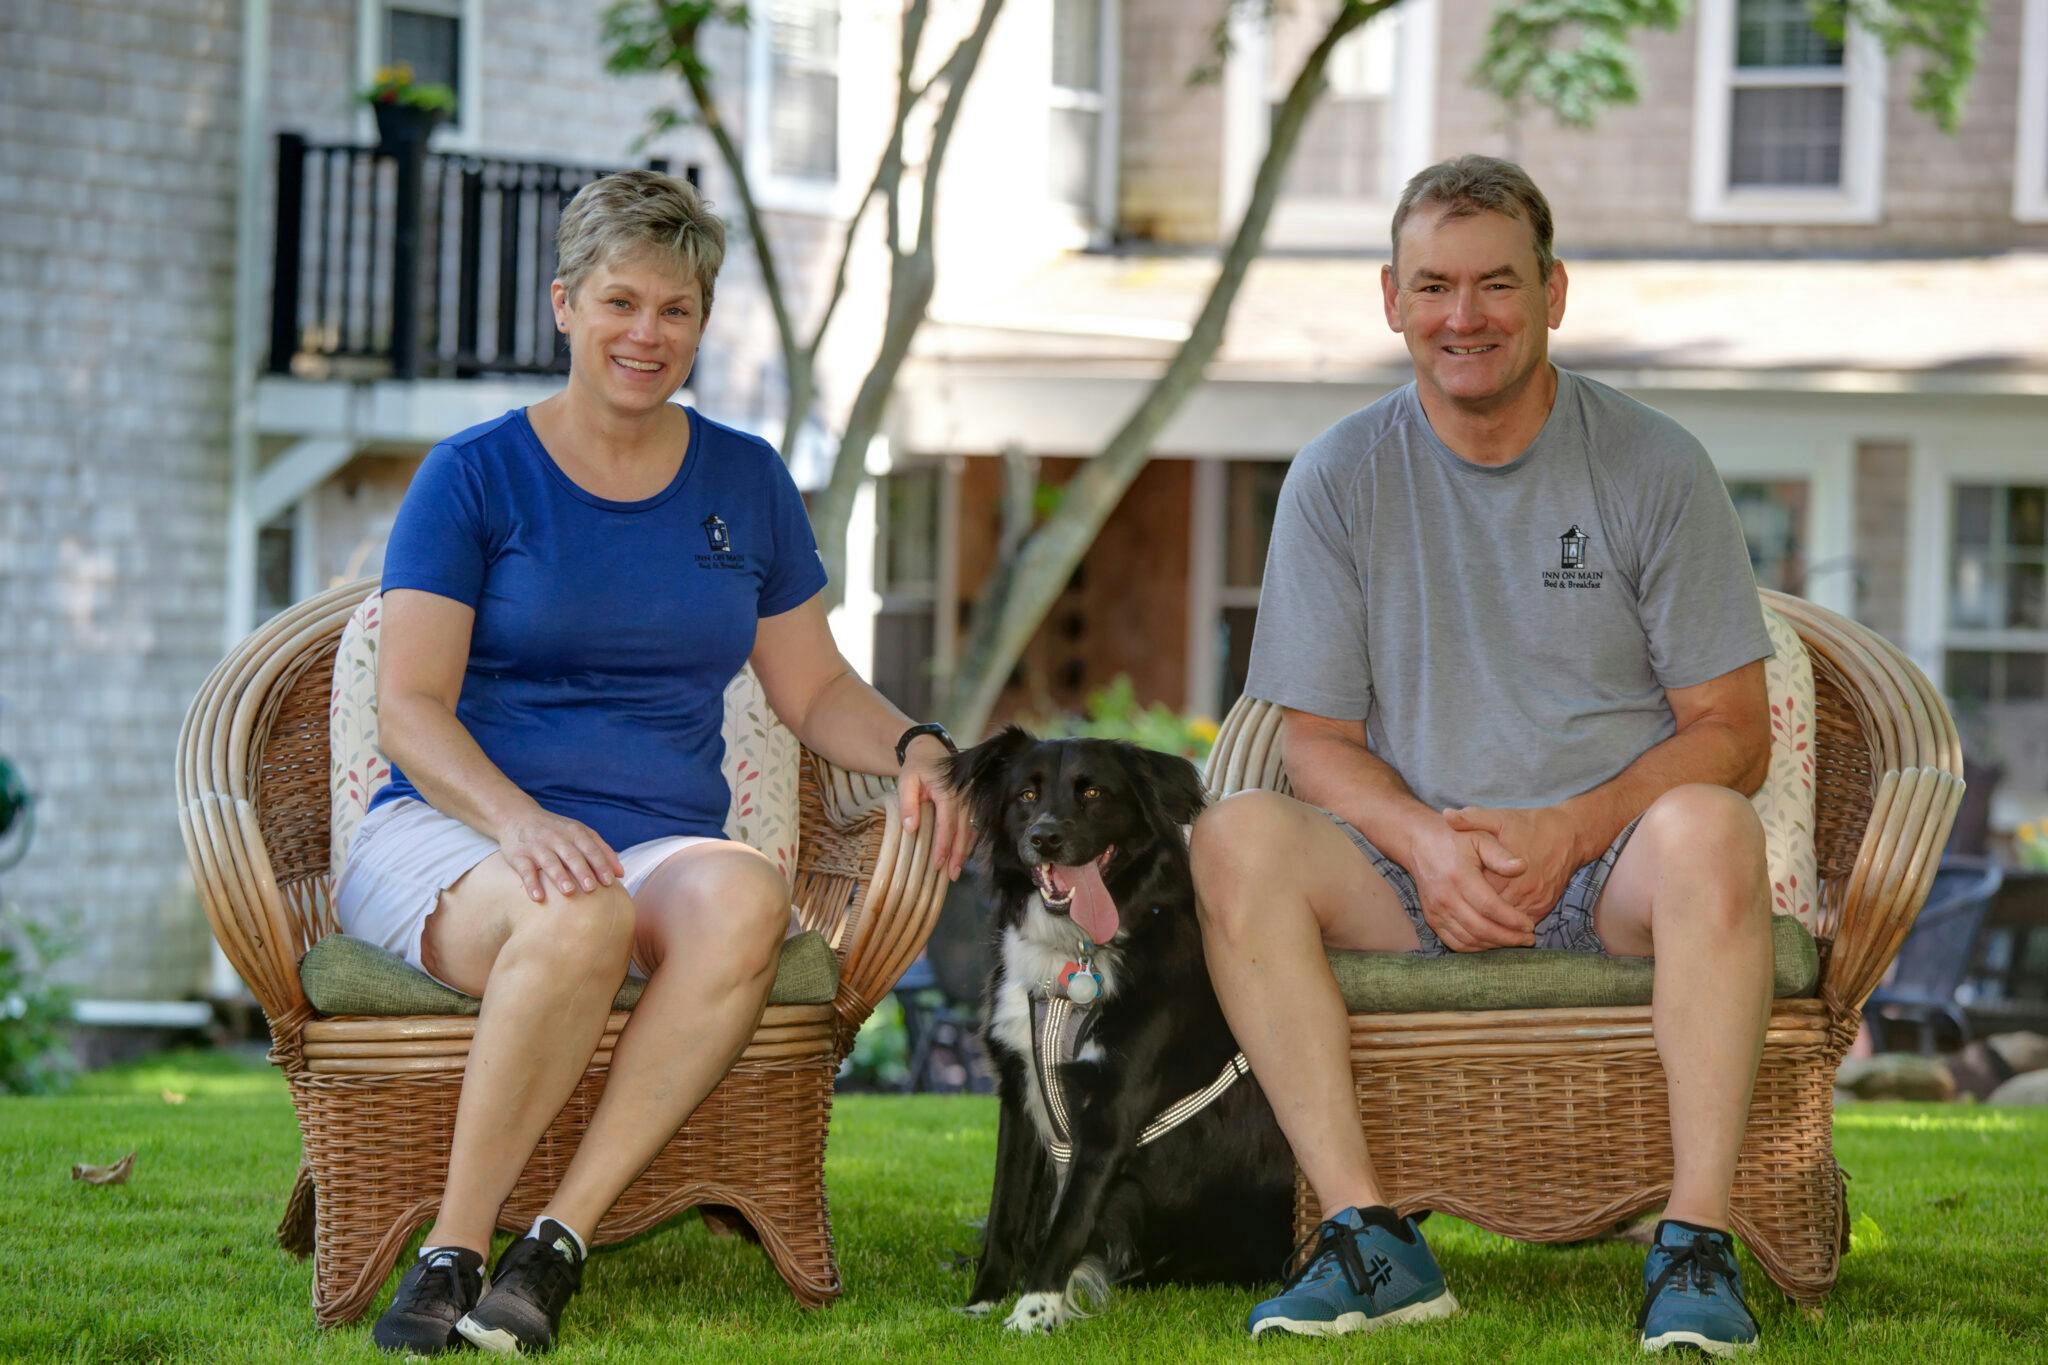 Innkeepers sitting in yard on wicker chairs with black dog sitting between them